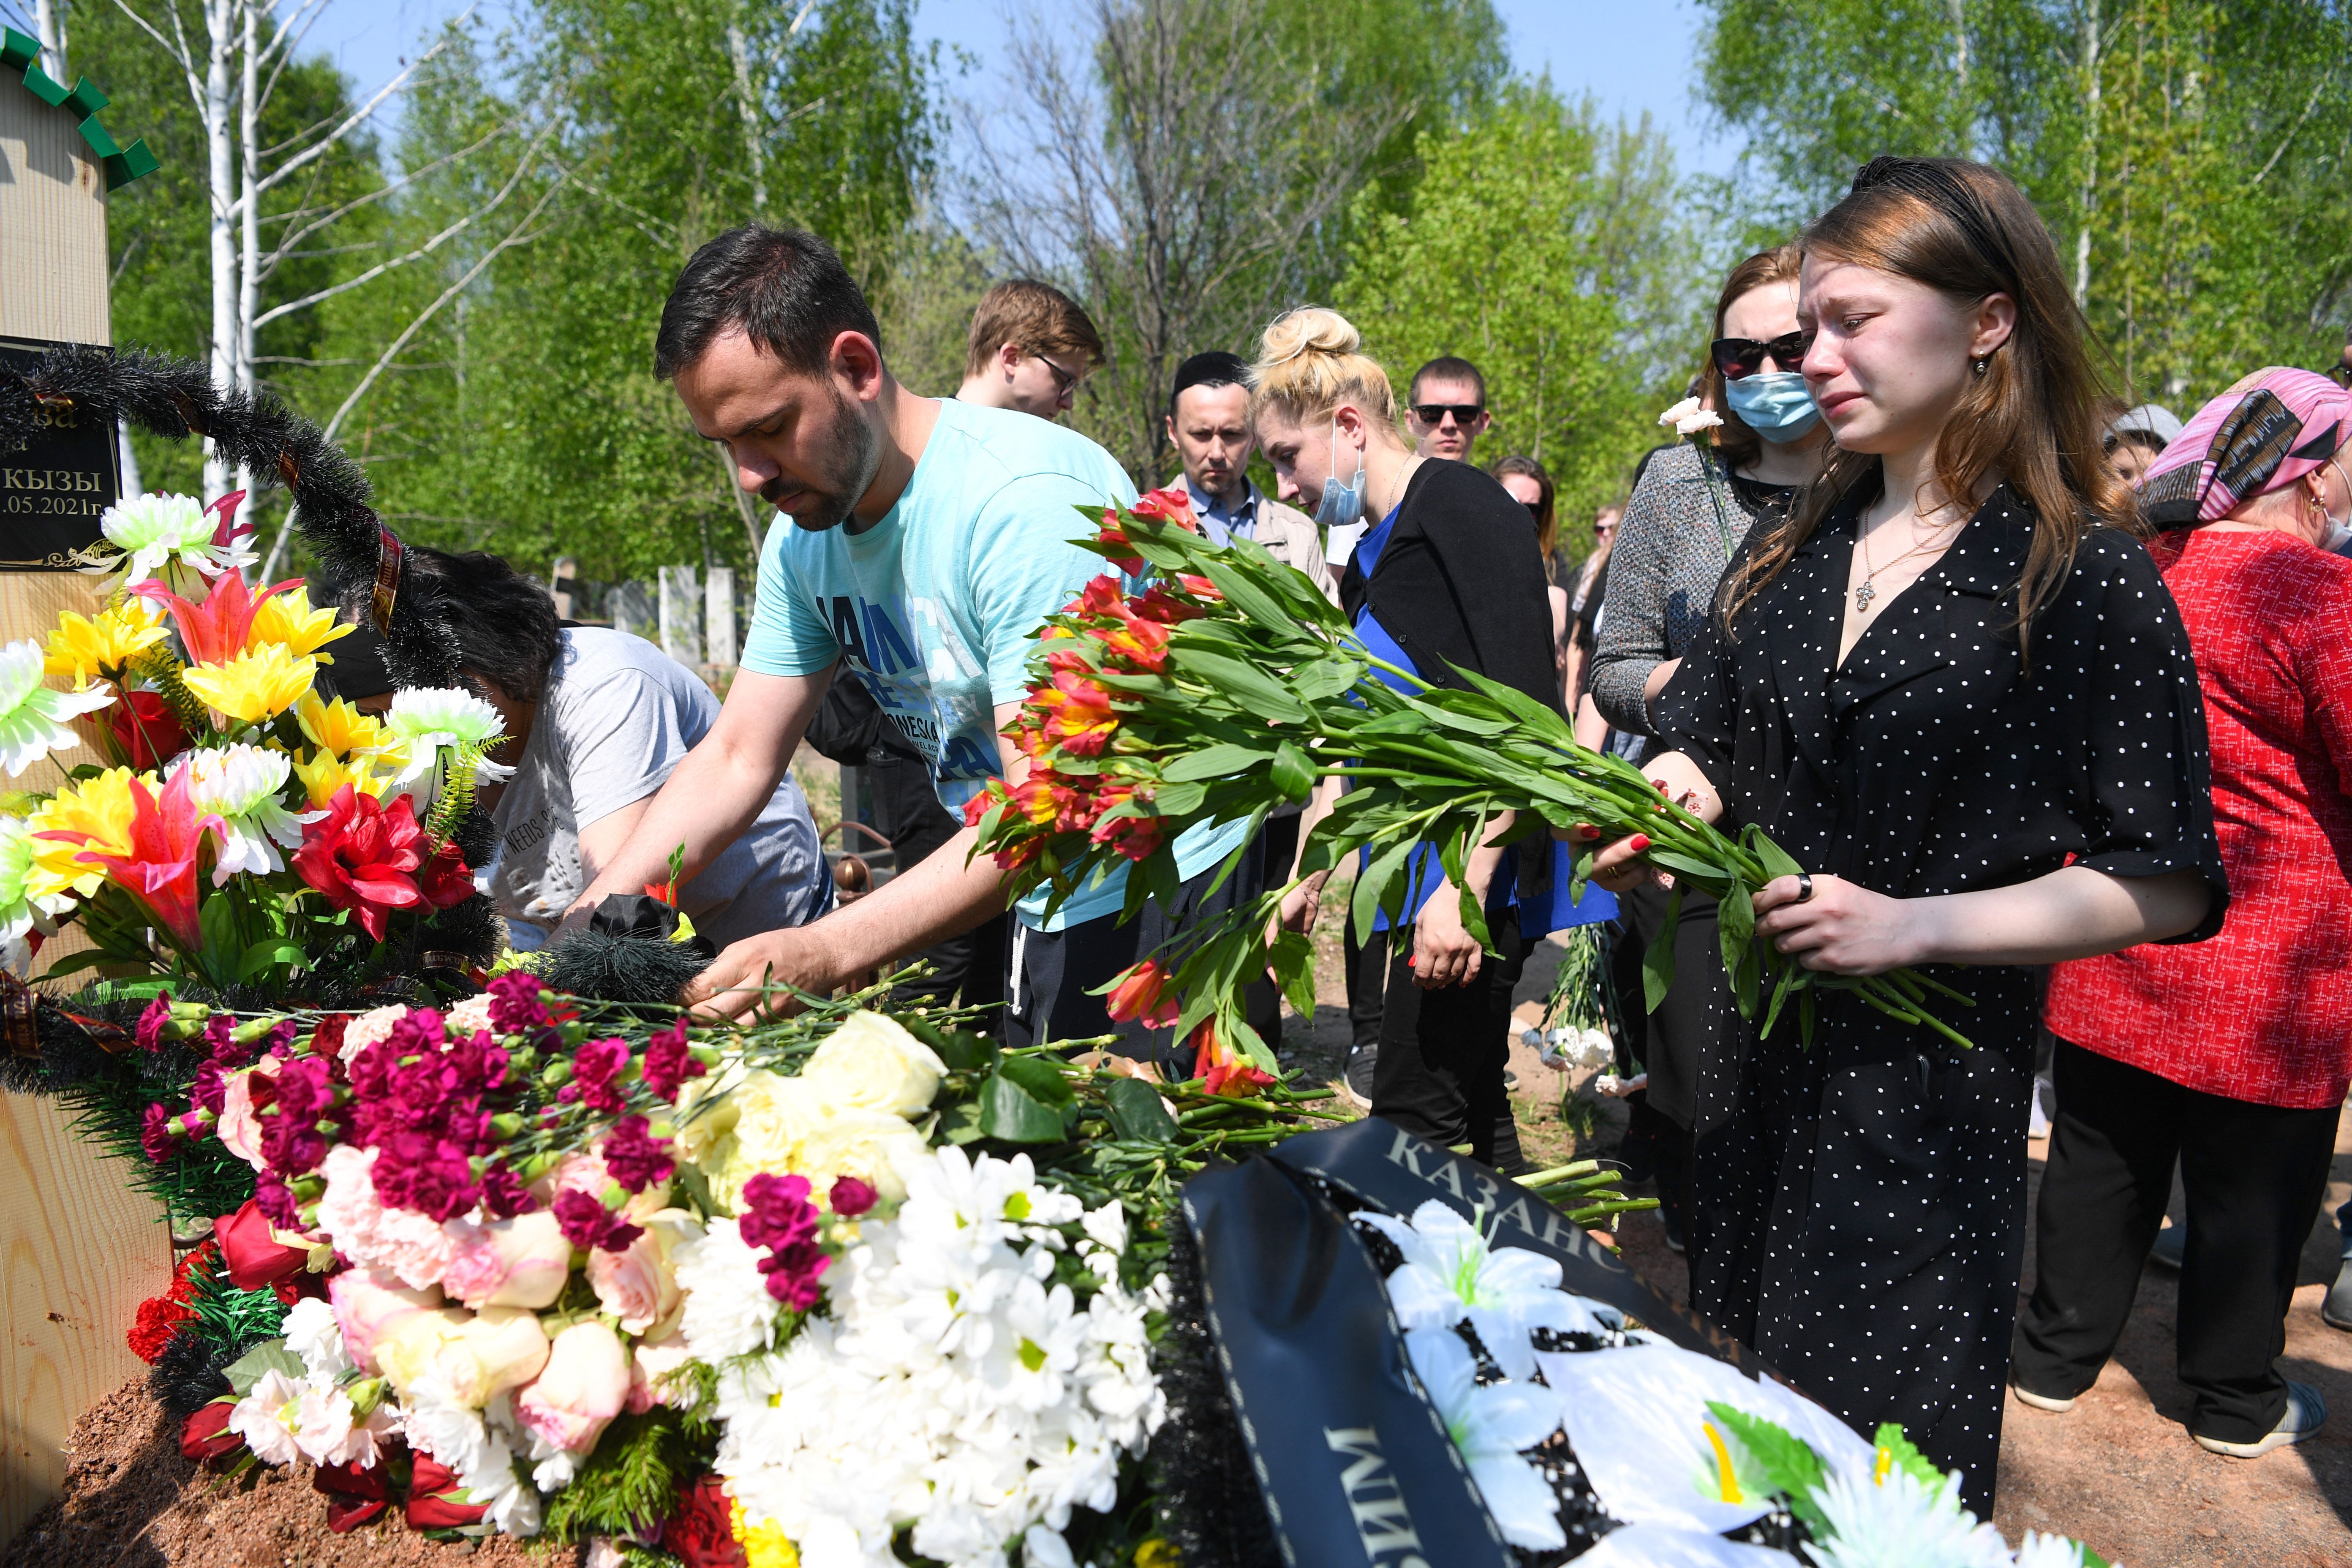 Mourners lay flowers at the grave of English teacher Elvira Ignatyeva, who was killed during a shooting at School No. 175, during her funeral in Kazan.